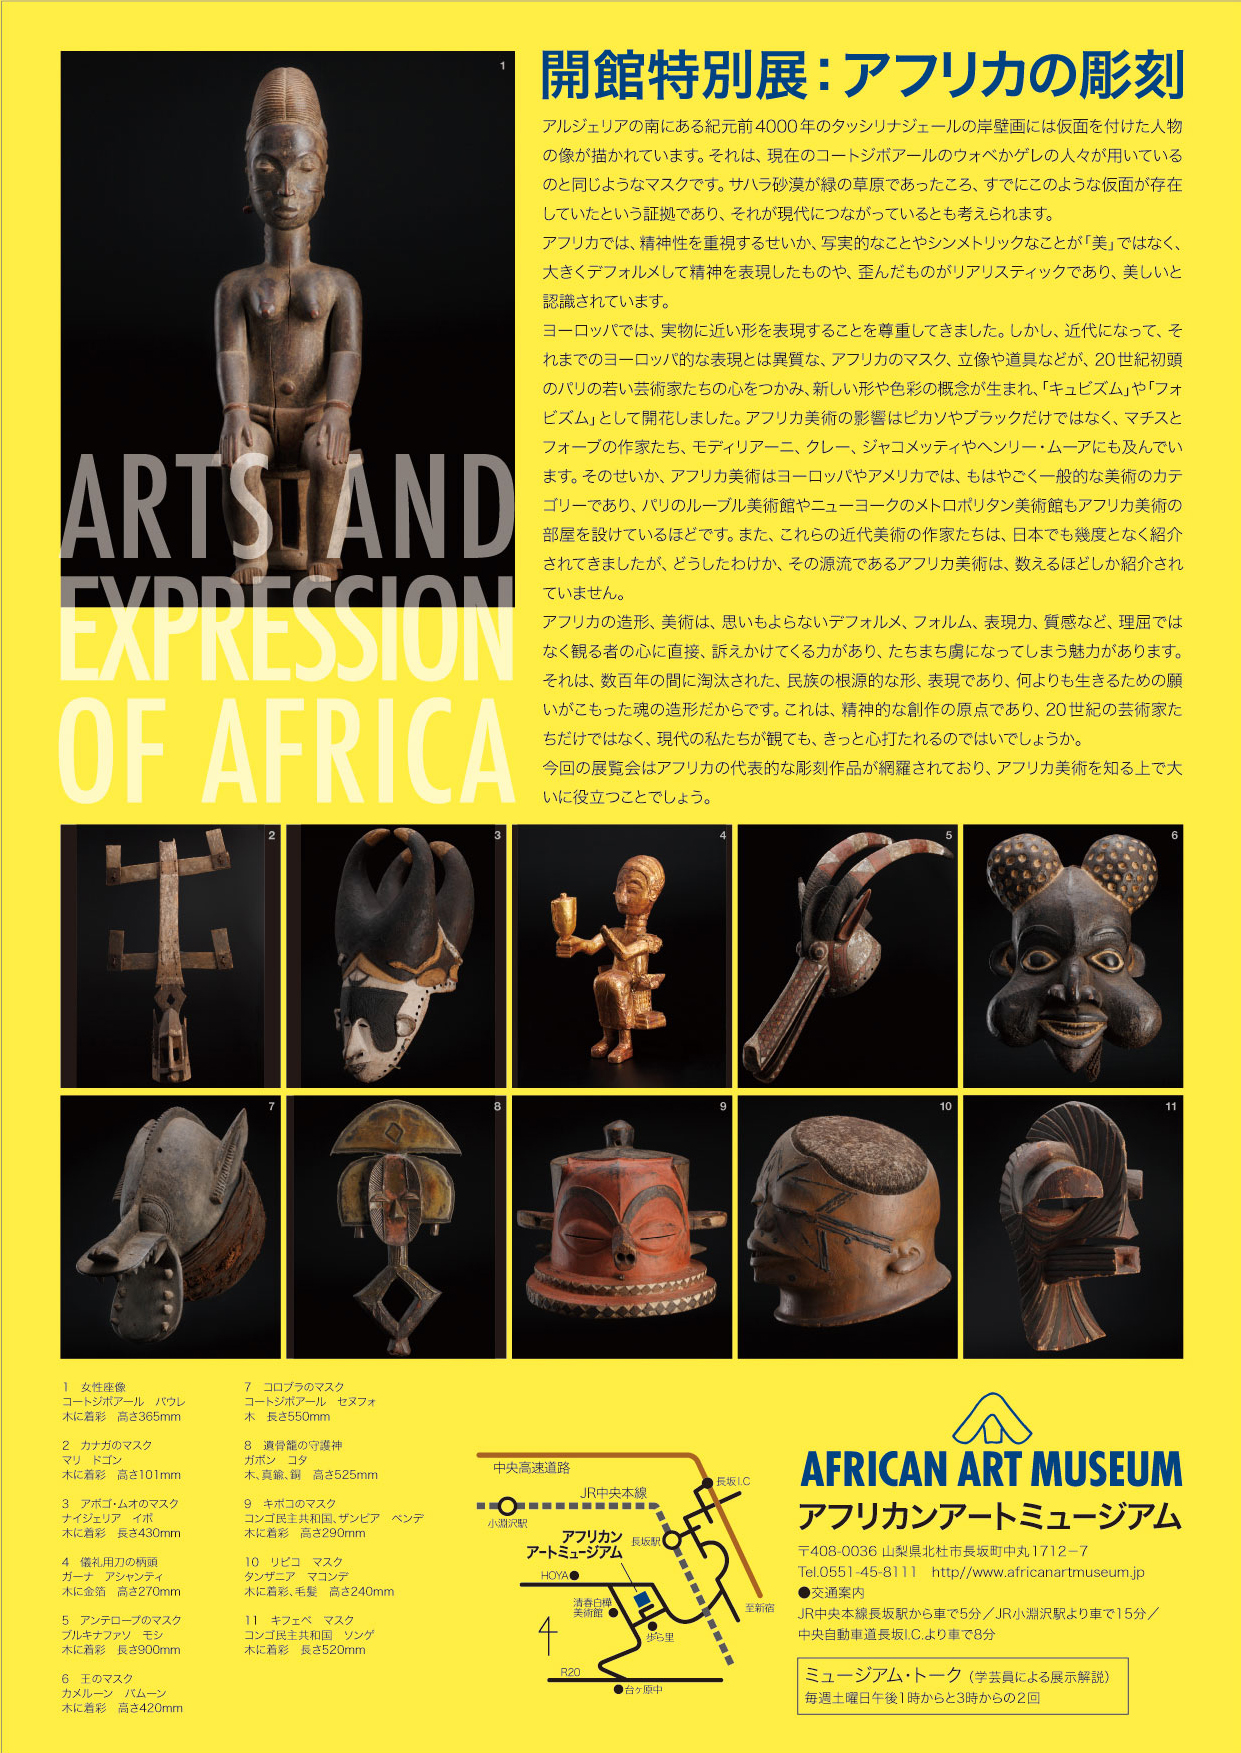 ARTS AND EXPRESSION OF AFRICA